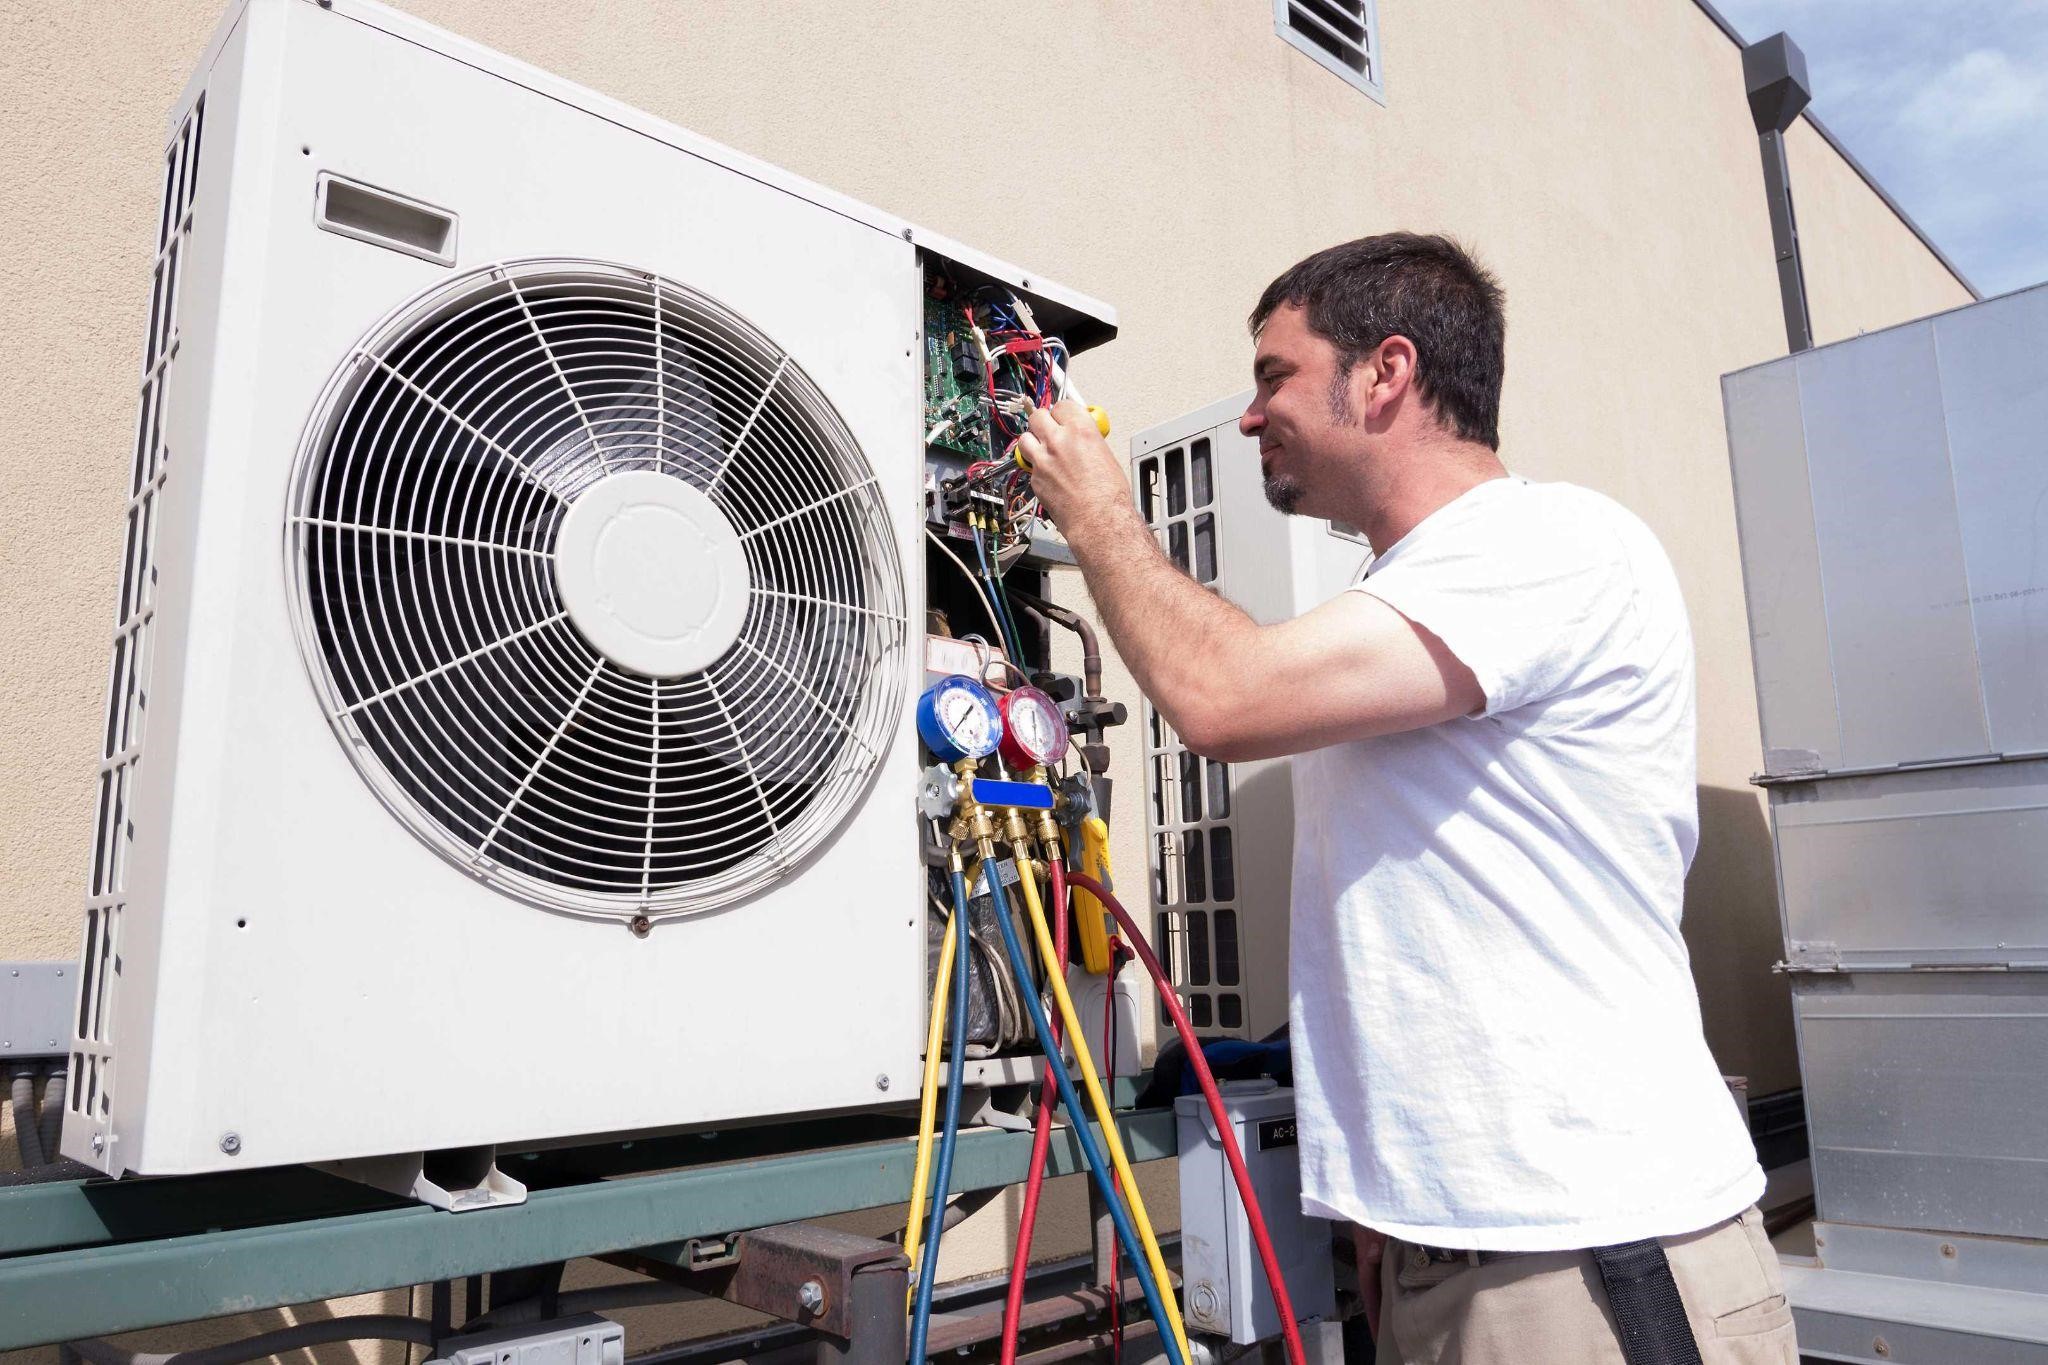 #7 Common Mistakes Homeowners Make When Hiring HVAC Technicians